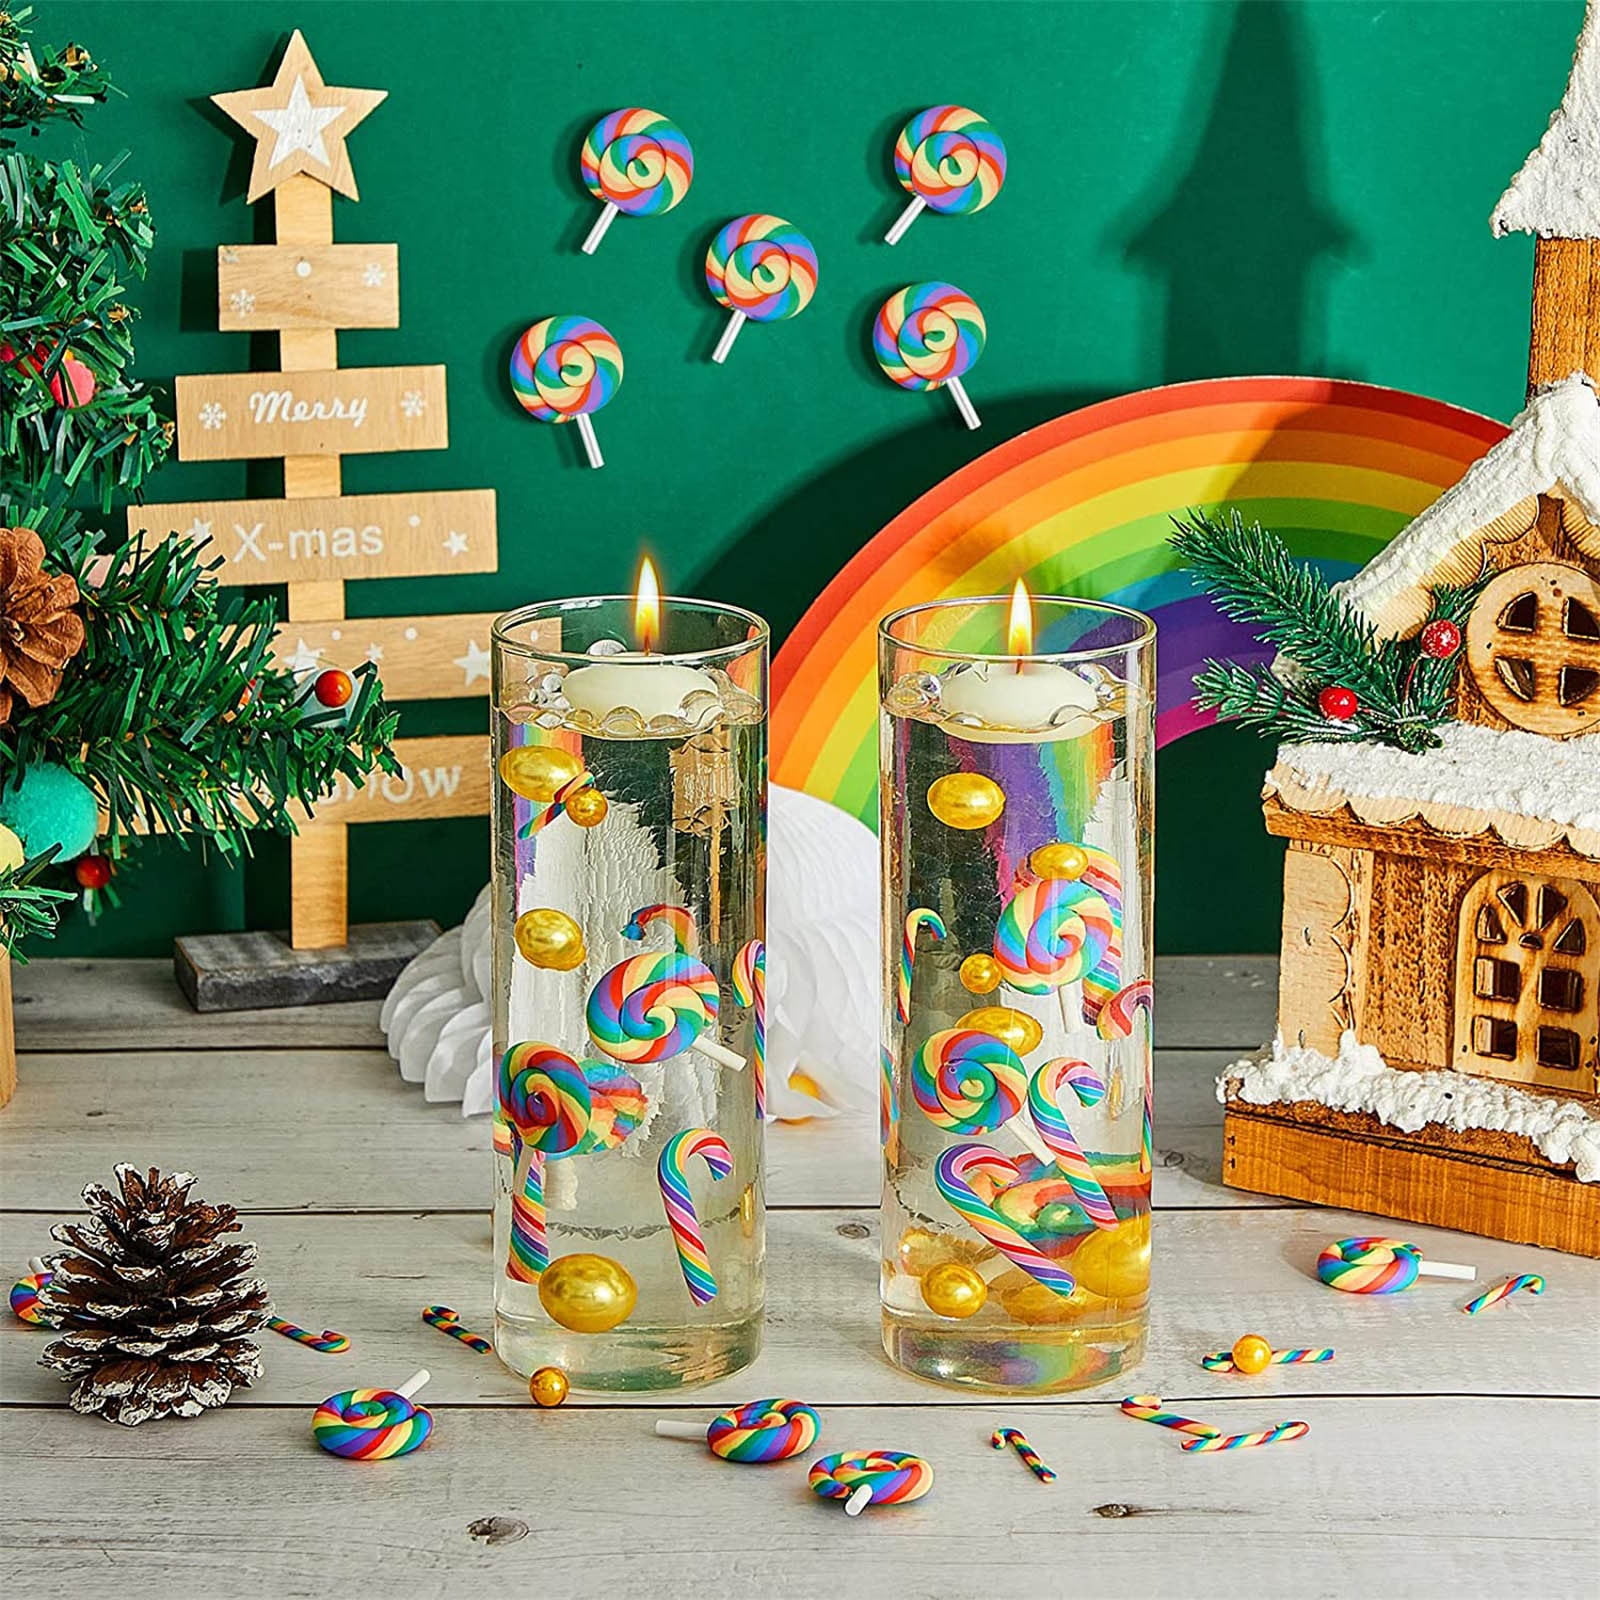 CHGBMOK 2106 Pieces Christmas Vase Filler Yellow and Colorful Candy Cane  Pearl Water Gel Beads for Table Centerpieces Christmas Party Decorations